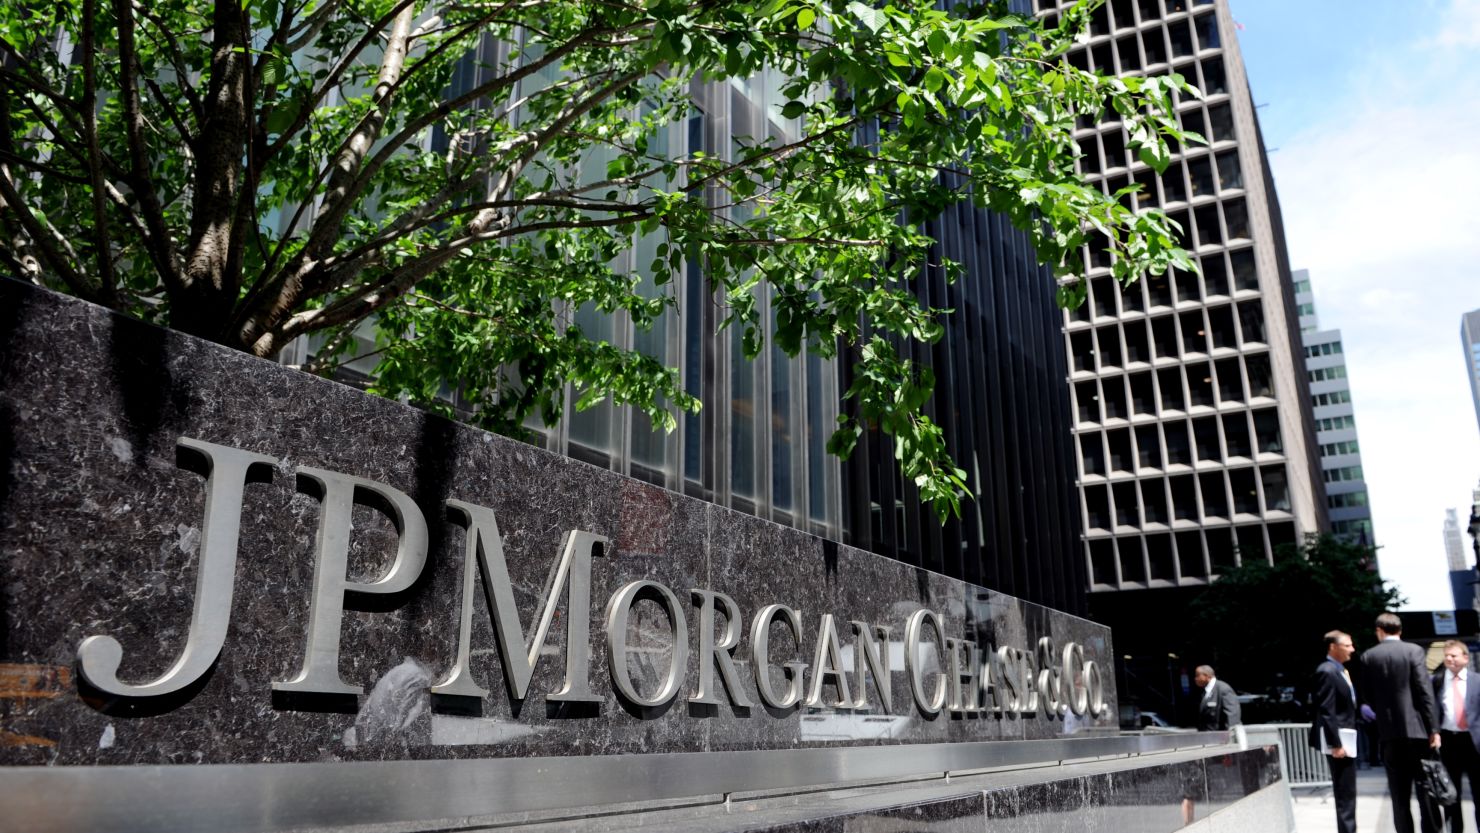 JP Morgan is employing intelligence methods to identify potential rogue traders among its 250,000-strong staff.